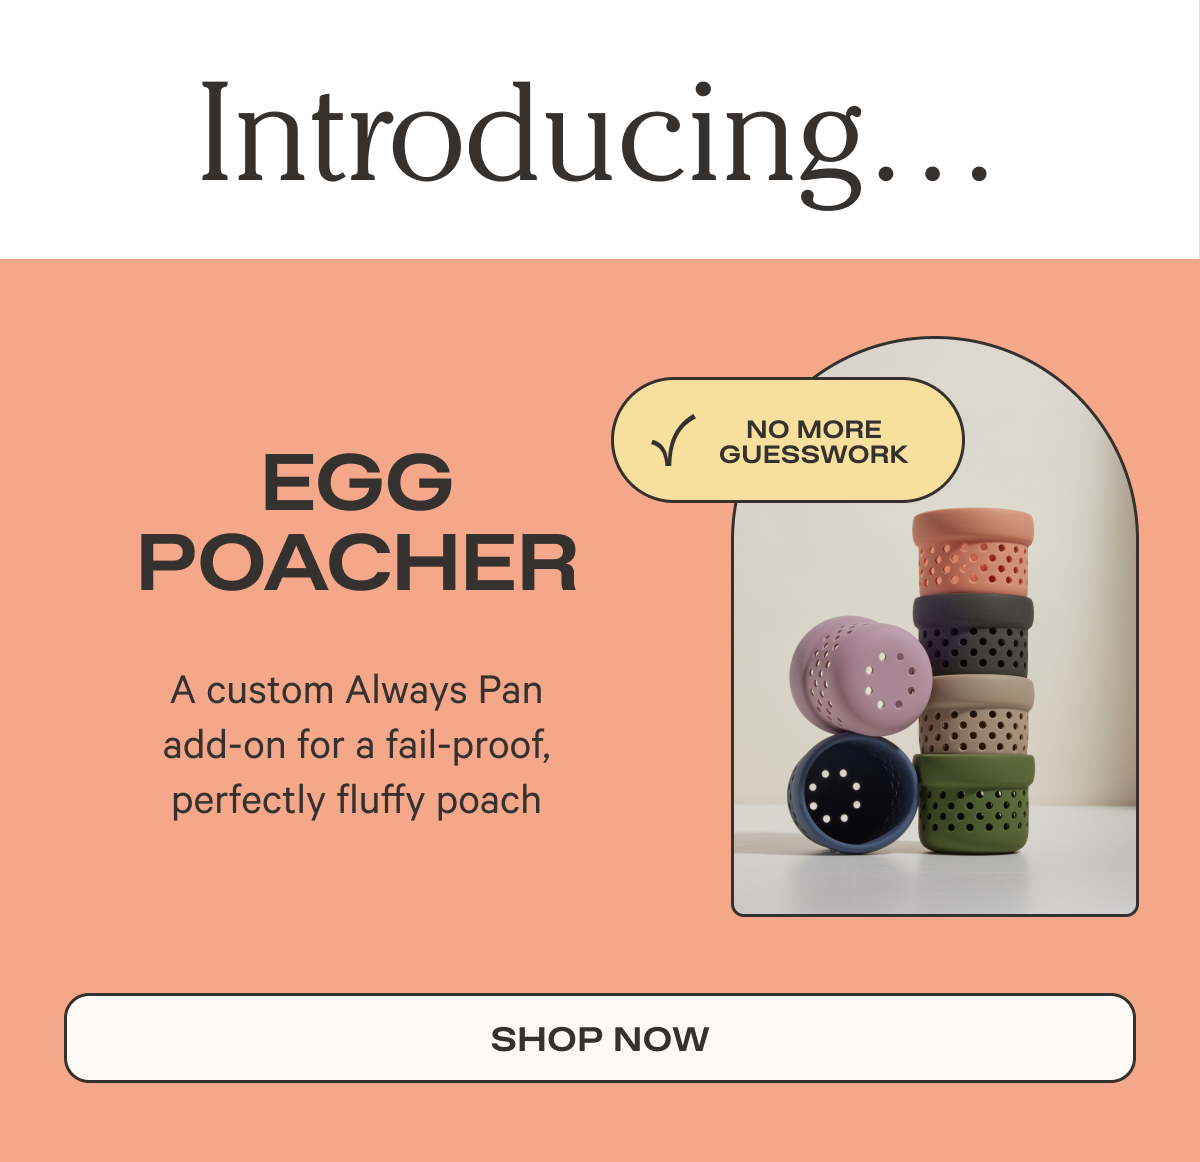 Introducing... Egg Poacher  A custom Always Pan add-on for a fail-proof, perfectly fluffy poach | Shop Now